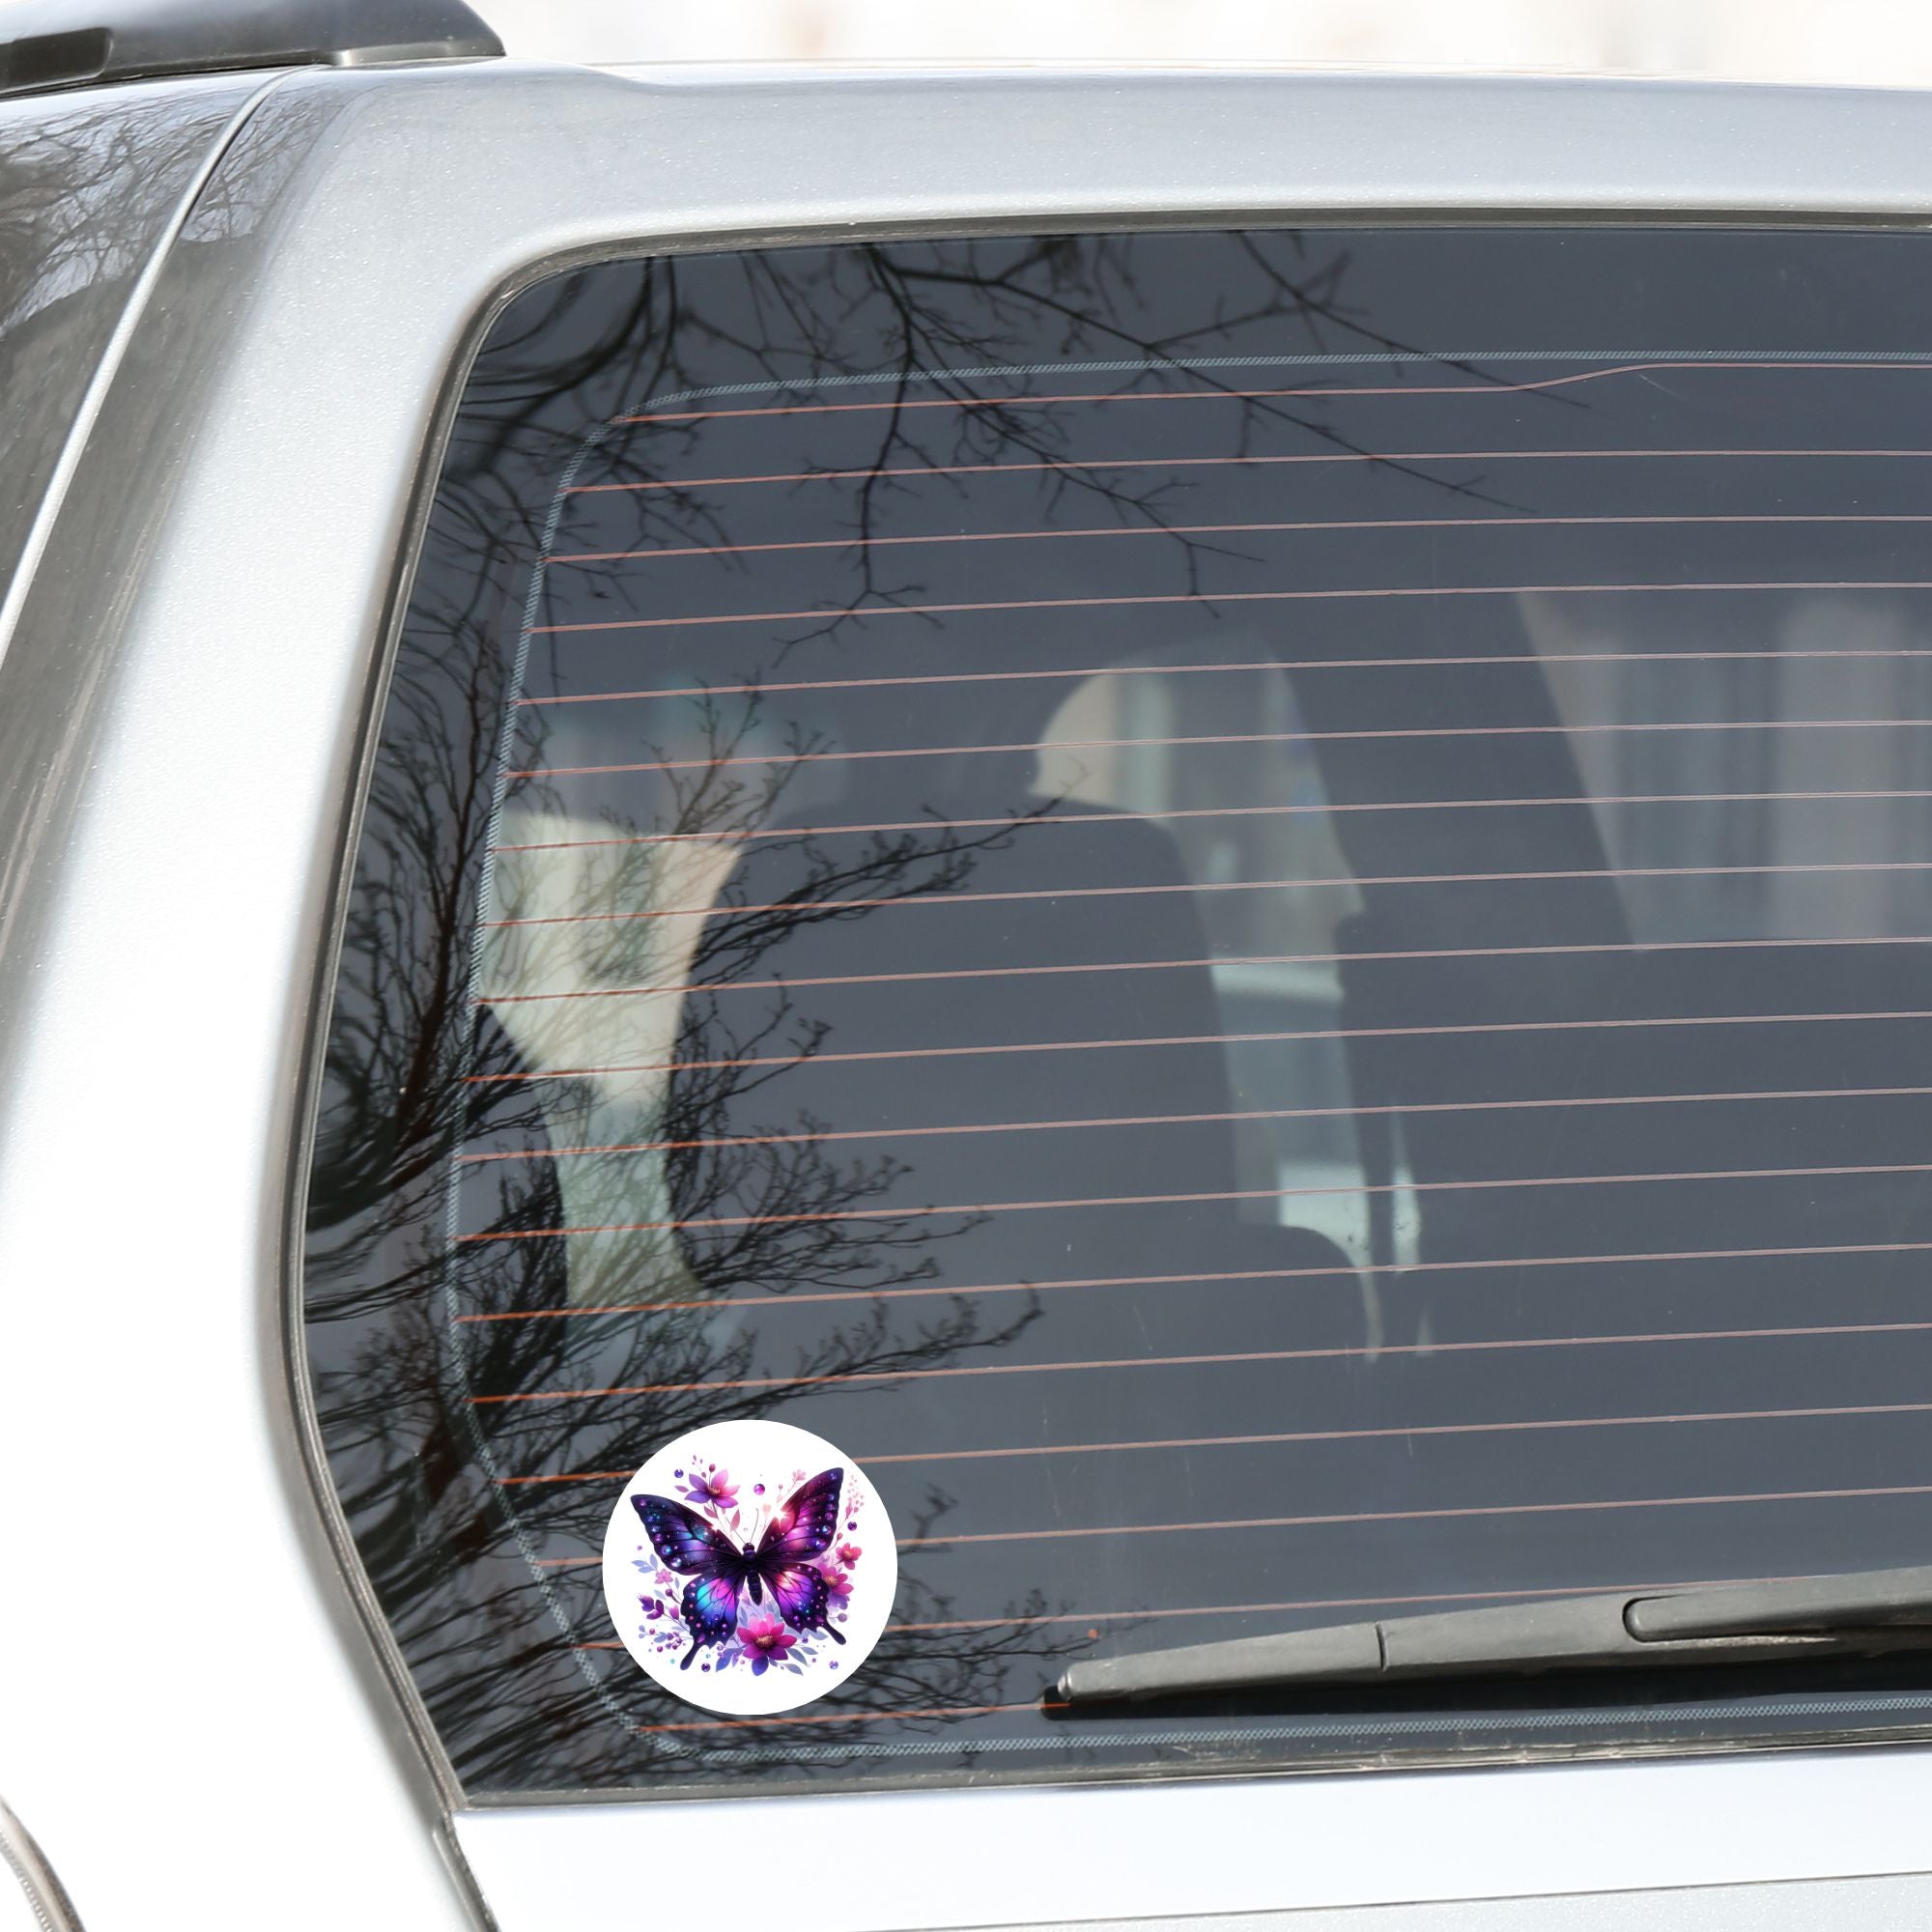 This image shows the Purple Butterfly with Stars die cut sticker on the back window of a car.